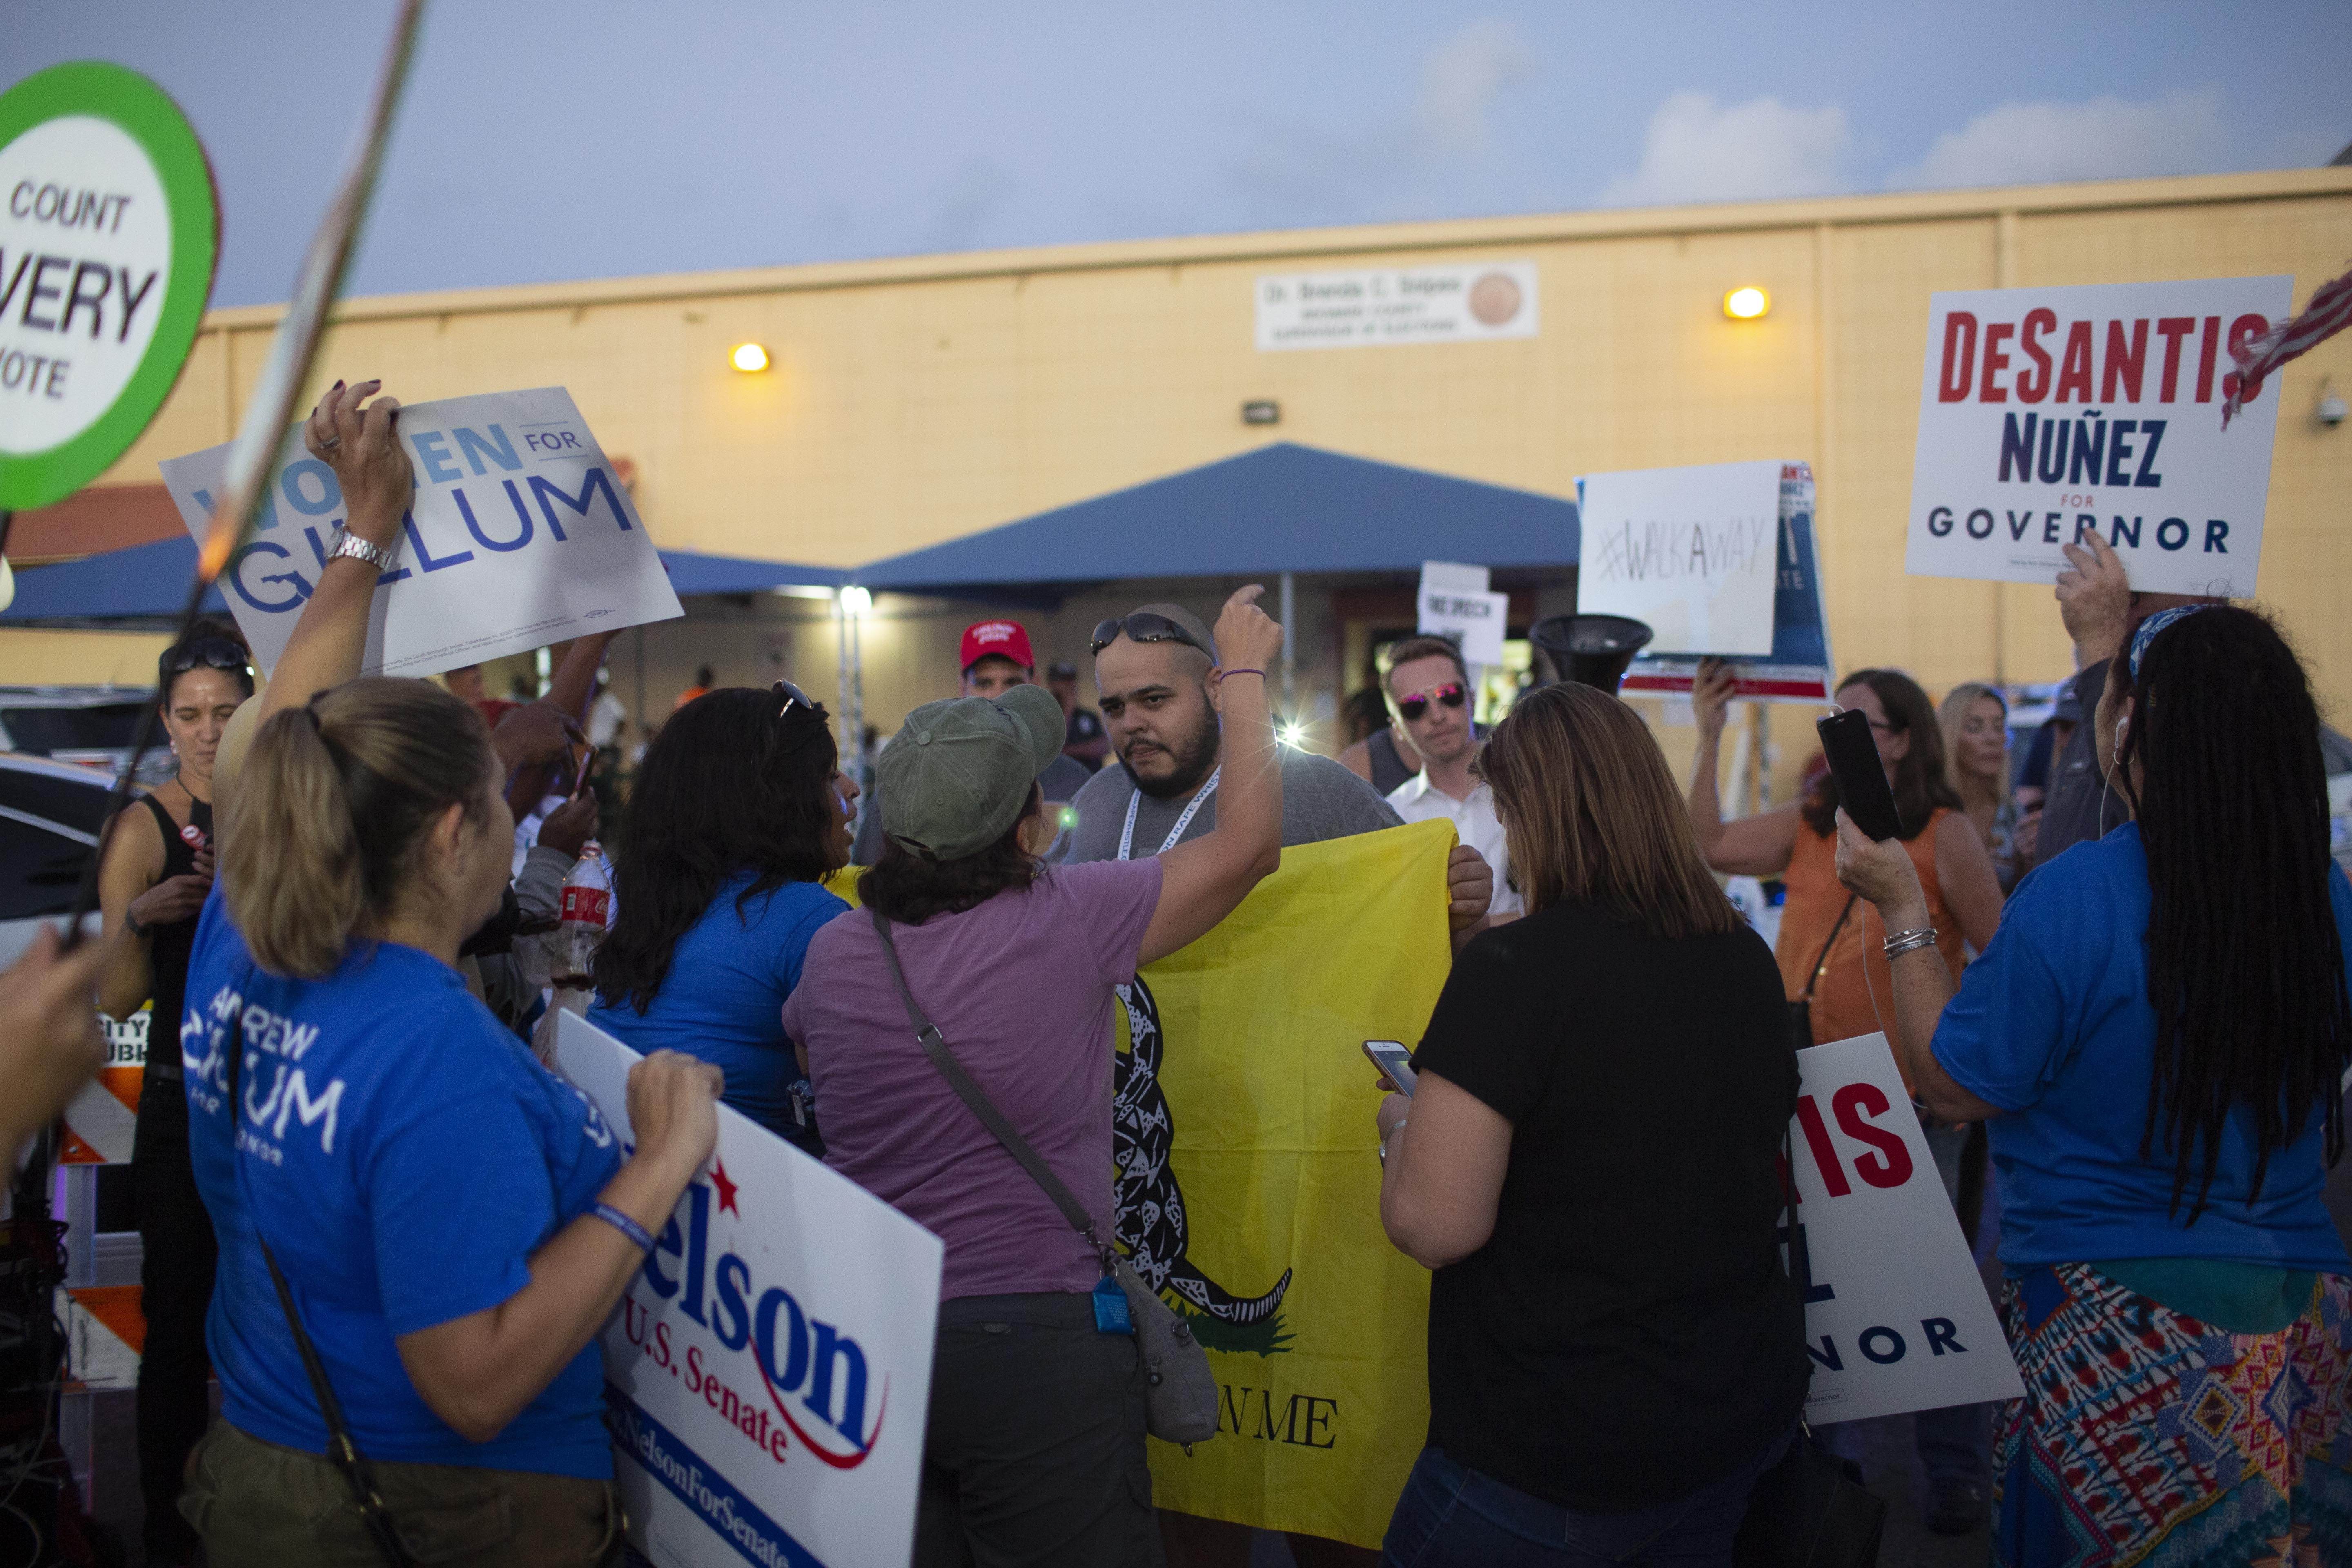 Protesters confront each other outside the Broward County Supervisor of Elections office on November 9, 2018 in Lauderhill, Florida. Photo: AFP